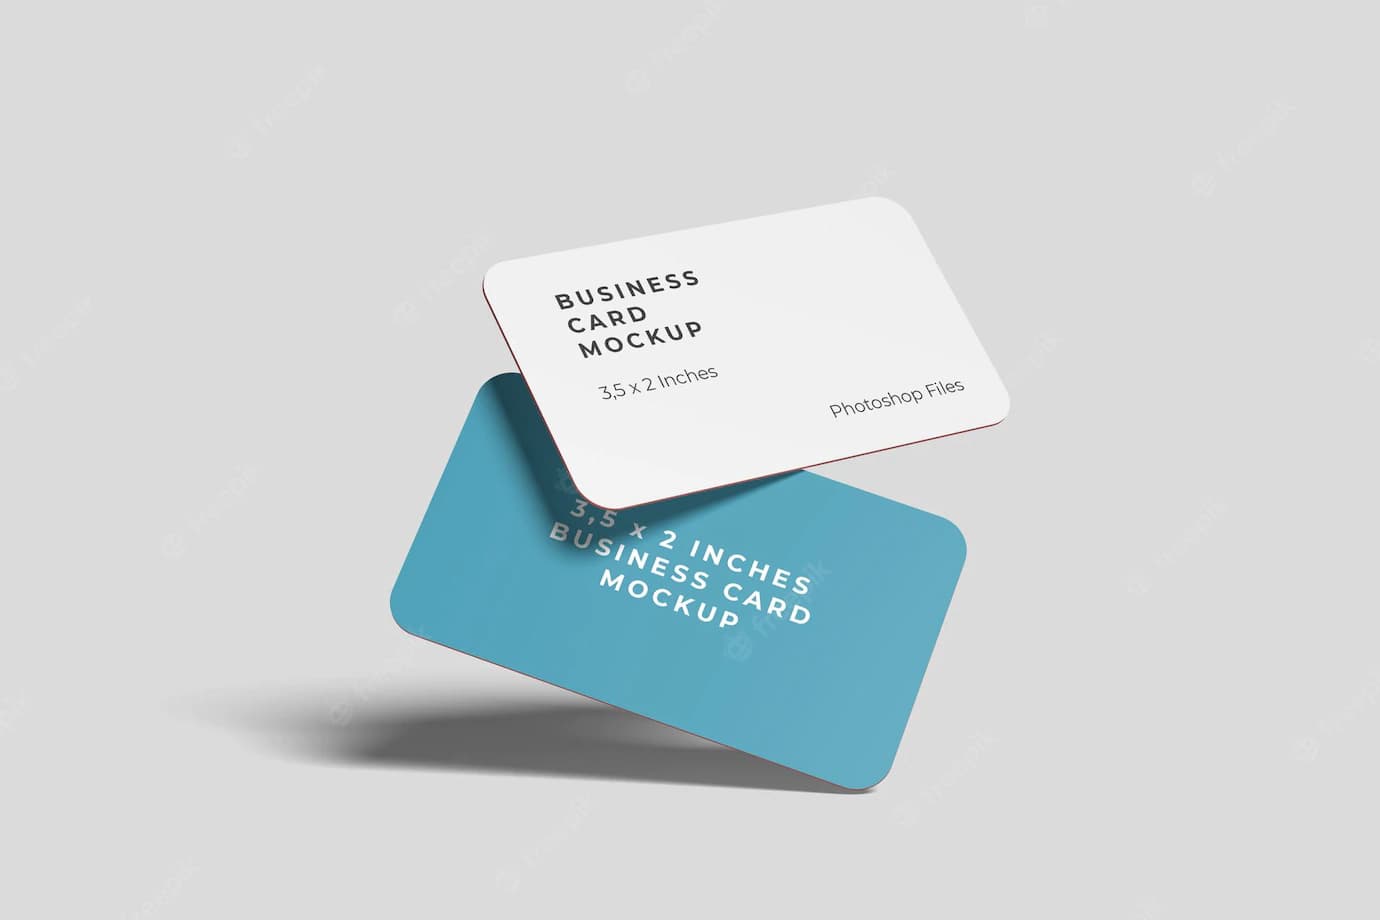 rounded business cards mockup 7838 424